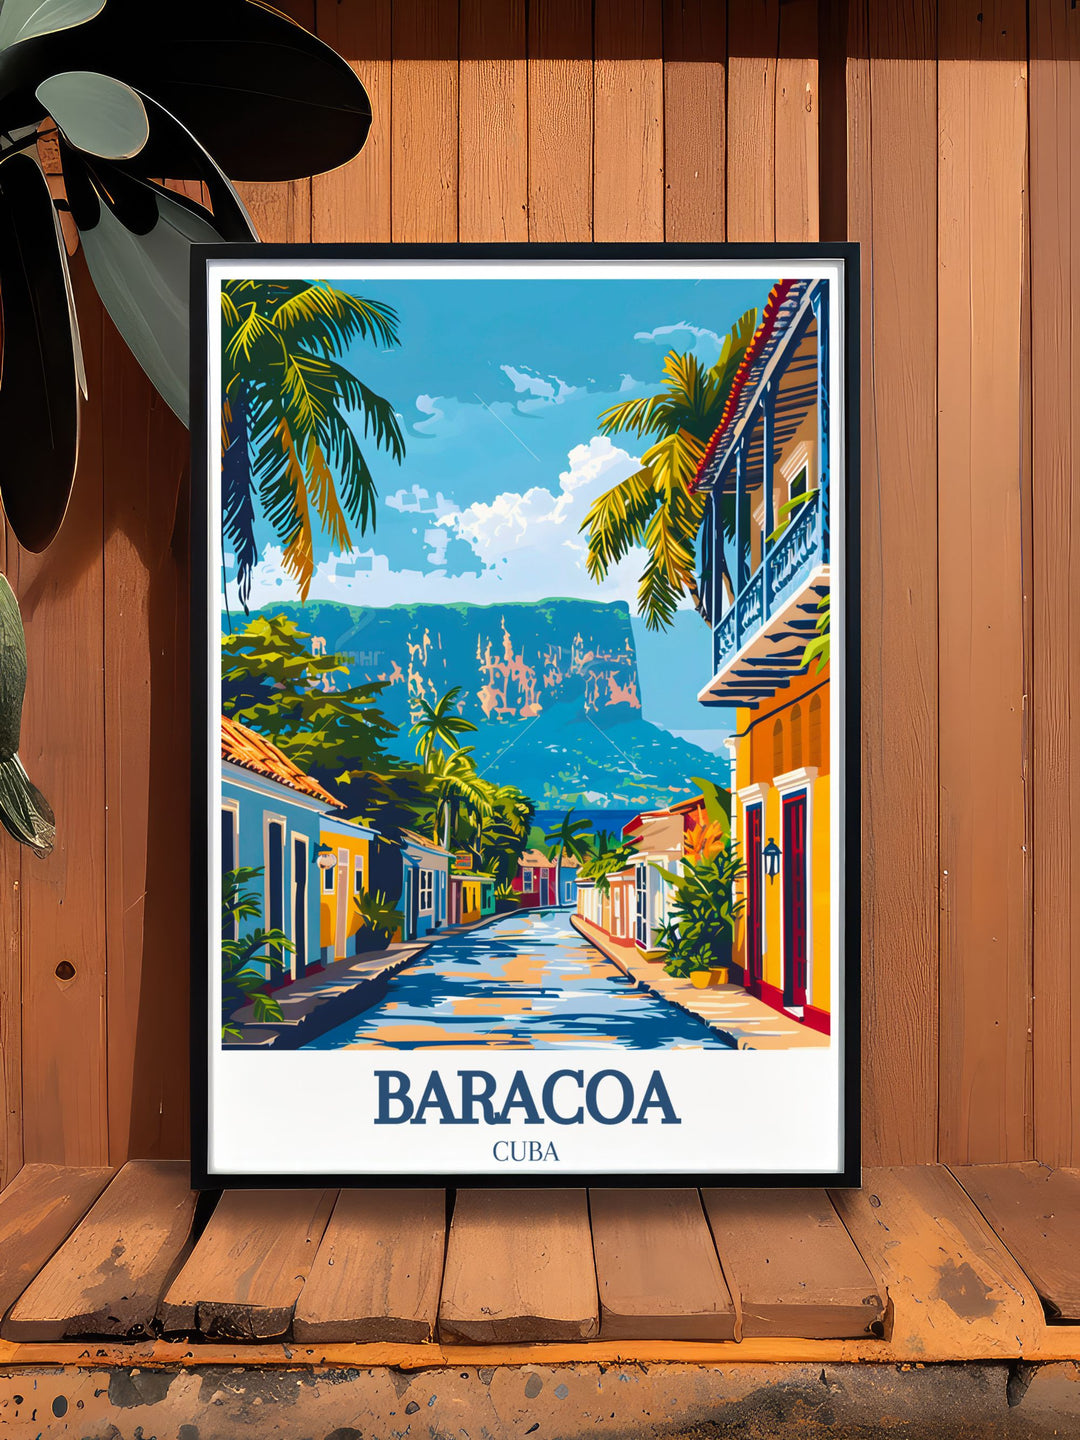 Elegant Cuba wall art depicting the enchanting Baracoa town and the majestic El Yunque Mountain. This piece highlights the contrast between historic architecture and natural landscapes, adding a charming yet adventurous touch to any room.